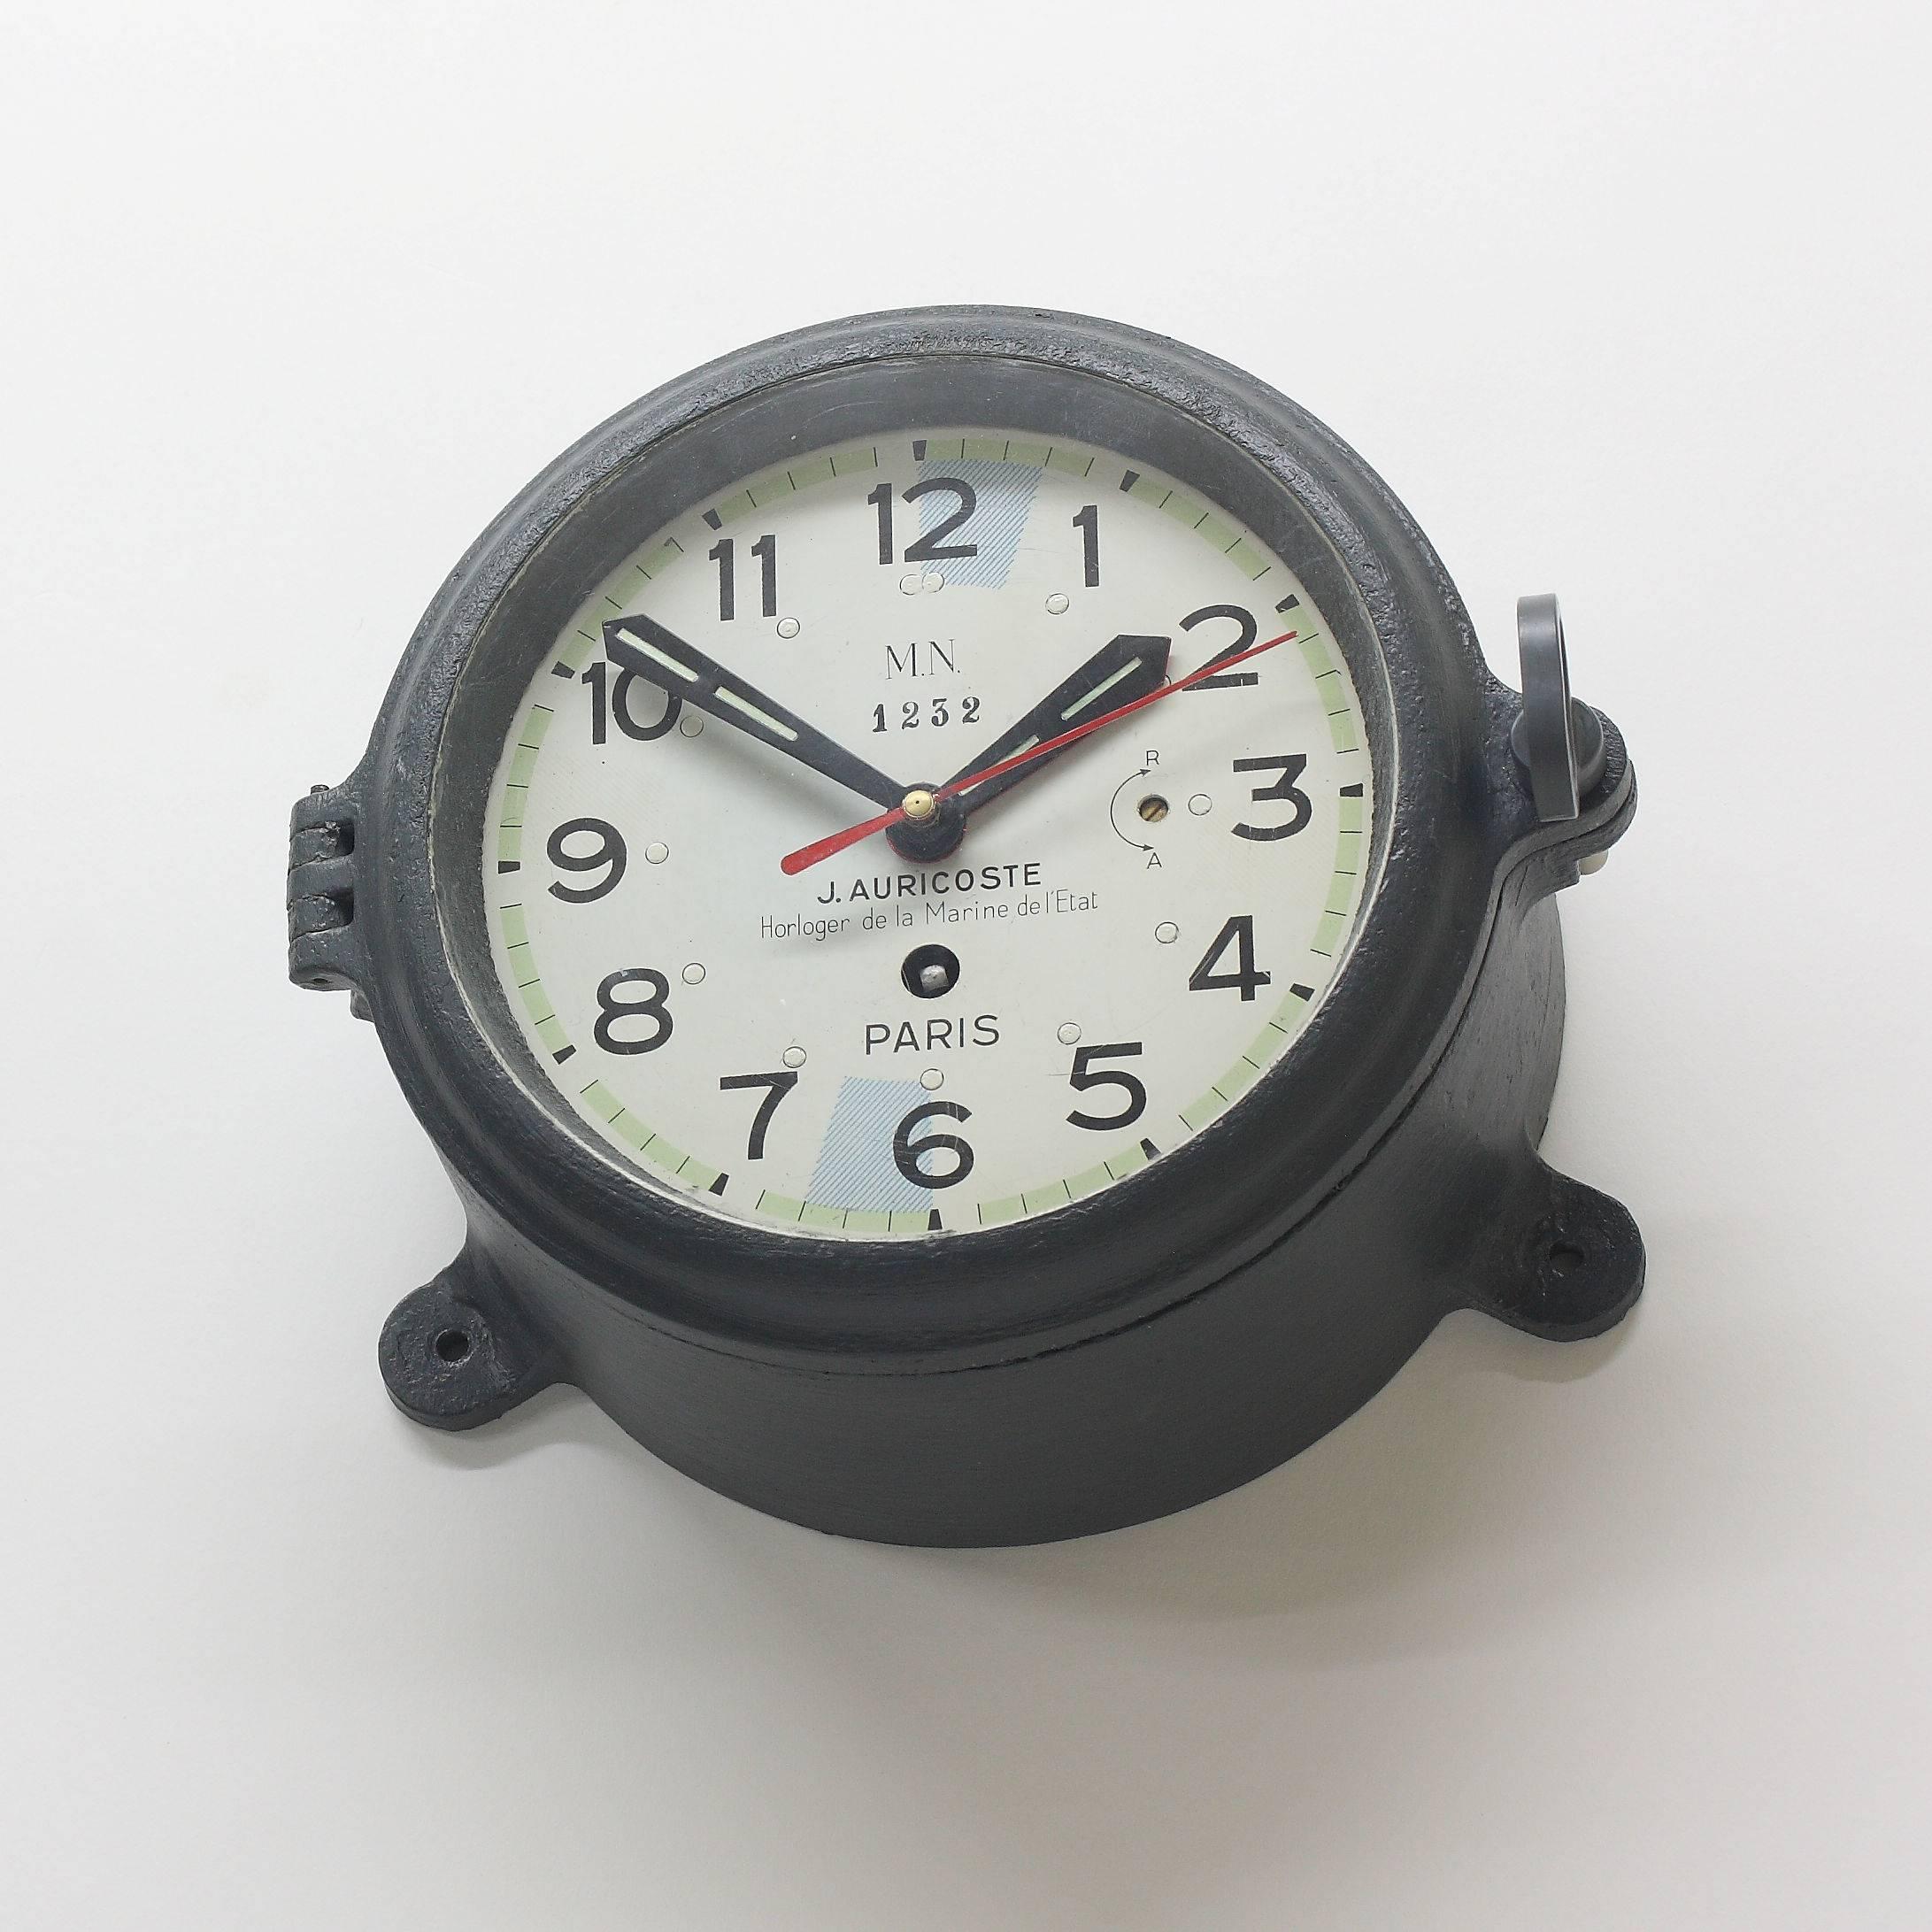 French Navy 1960s radio room bulkhead clock of good precision, with four hands: seconds hand, minute hand, hour hand, and secondary hour hand (red) for different time zone. This red hand is easily set so as to show any other time zone selected by